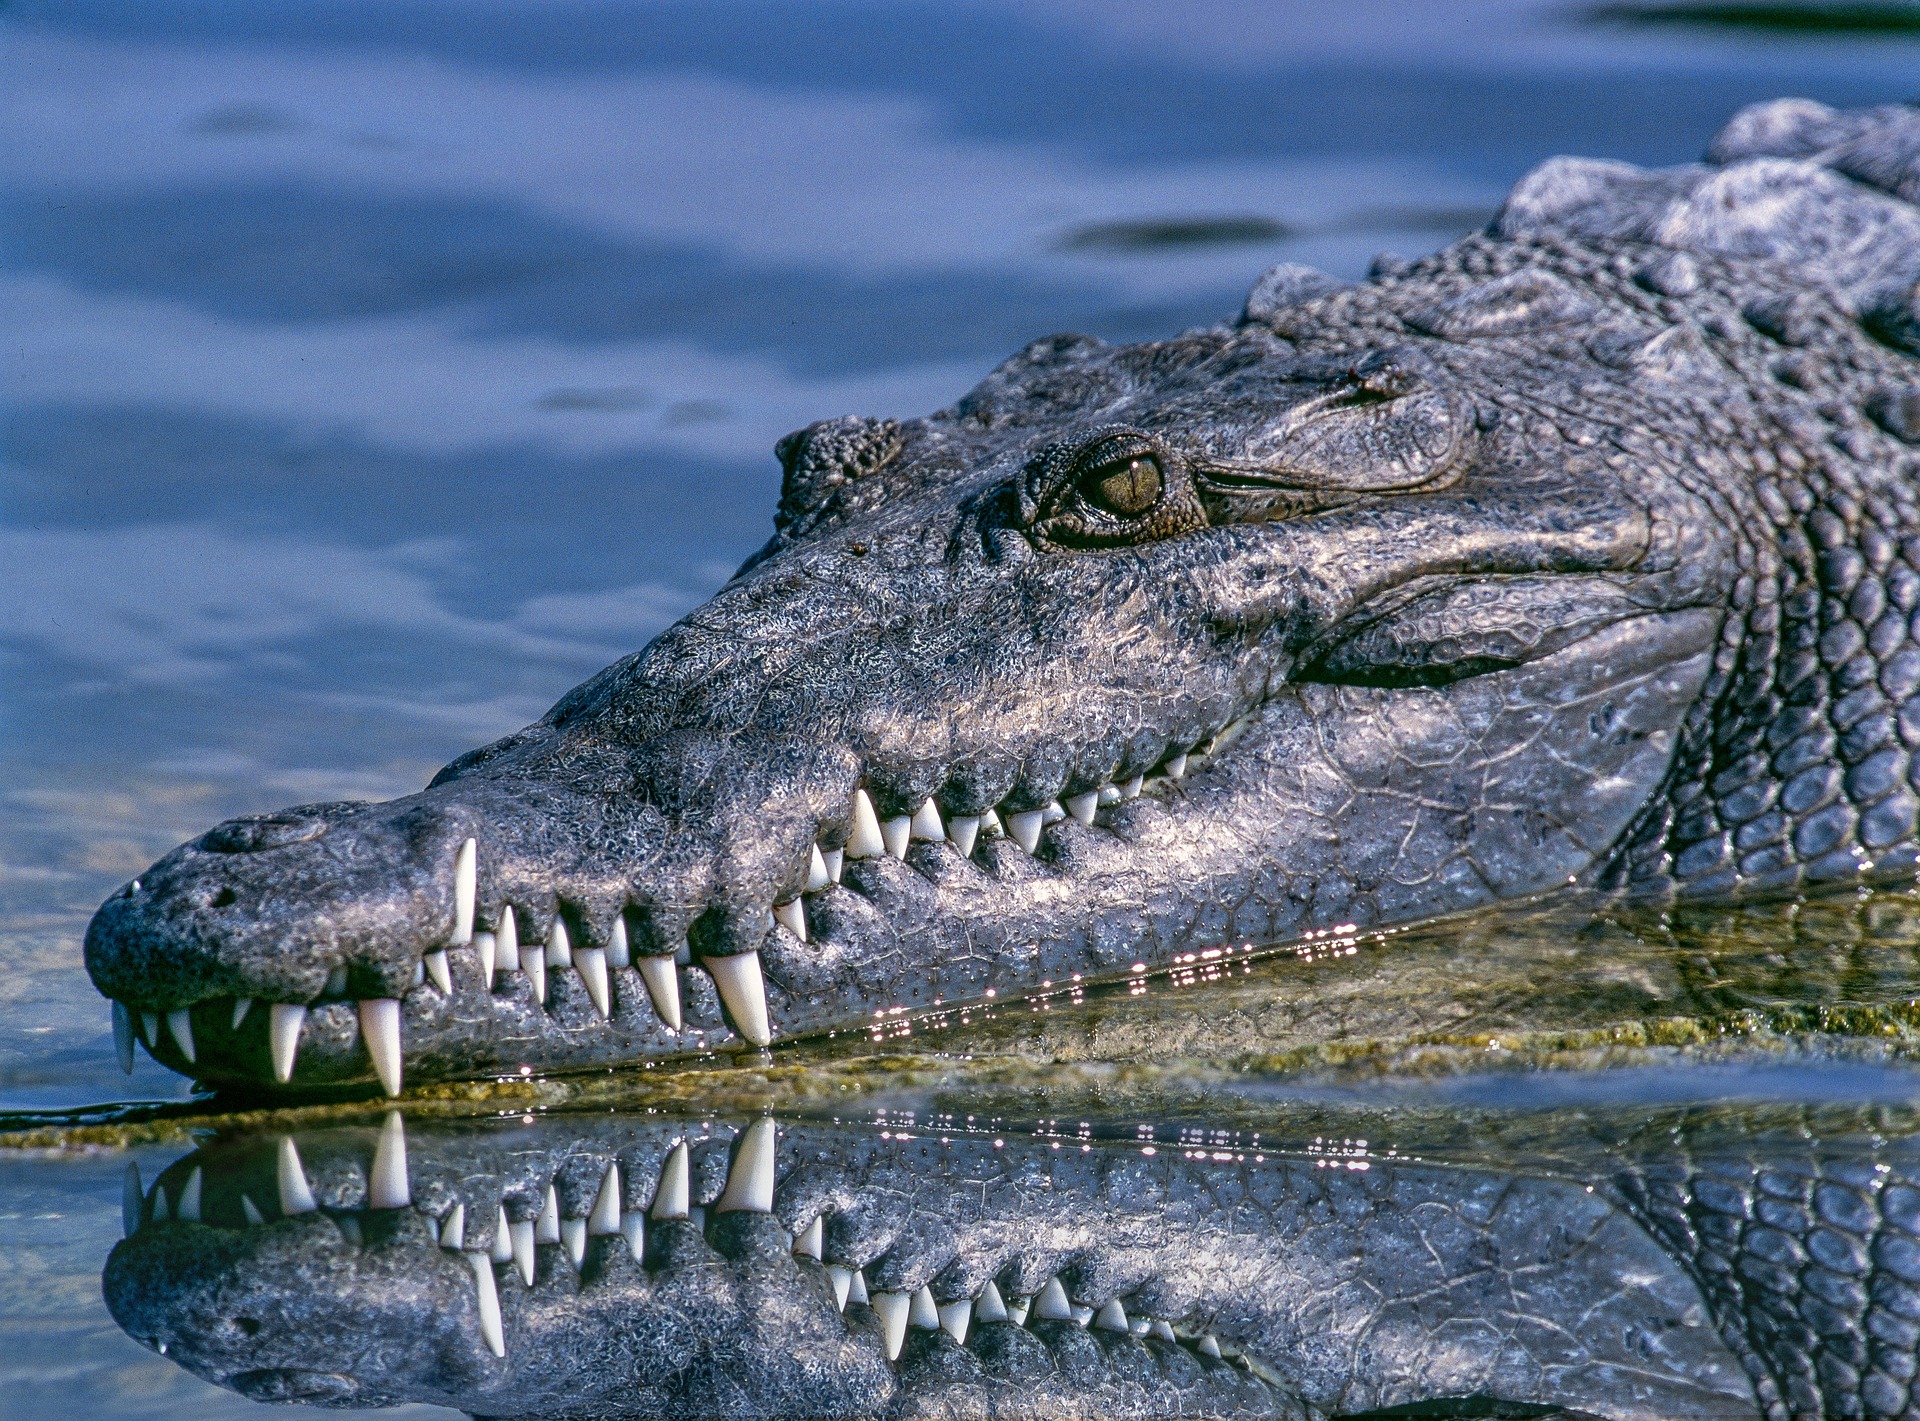 Just a 13-foot crocodile casually eating a shark on the beach, as if it’s not a big deal – BroBible